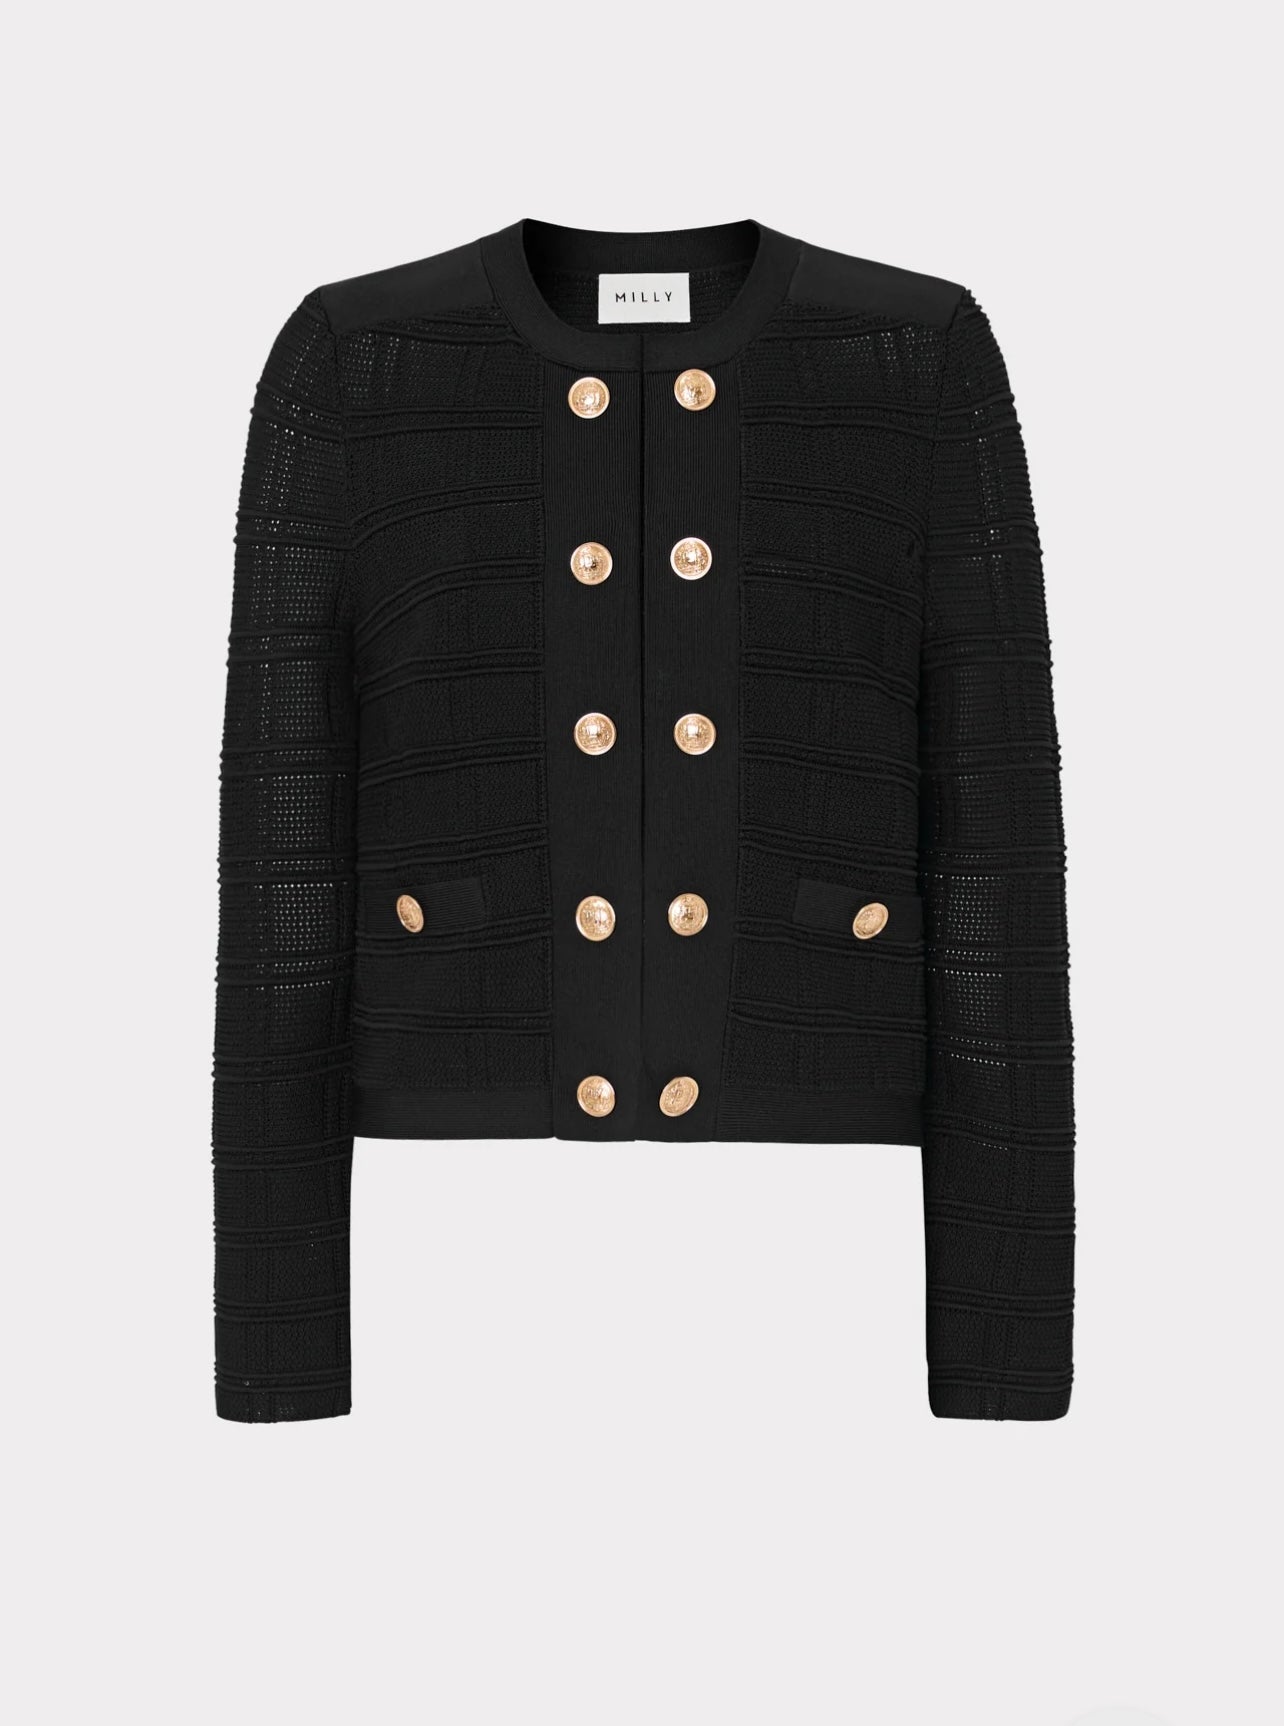 Milly Pointelle Textured Knit Jacket Black